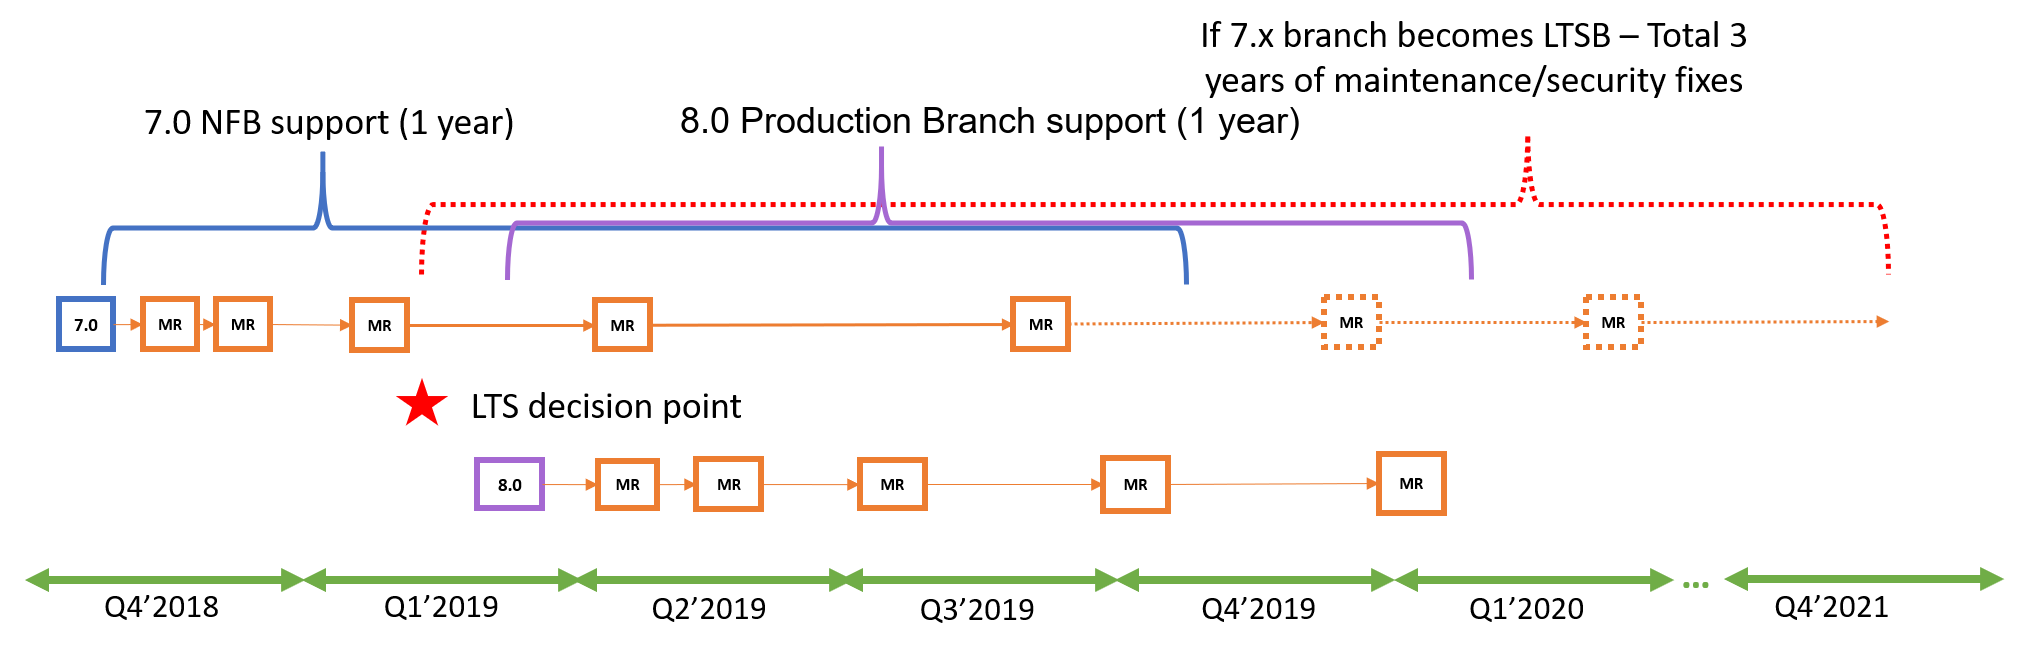 Diagram showing the timeline for designating Production Branch release an LTSB release and notifying customers of the designation.